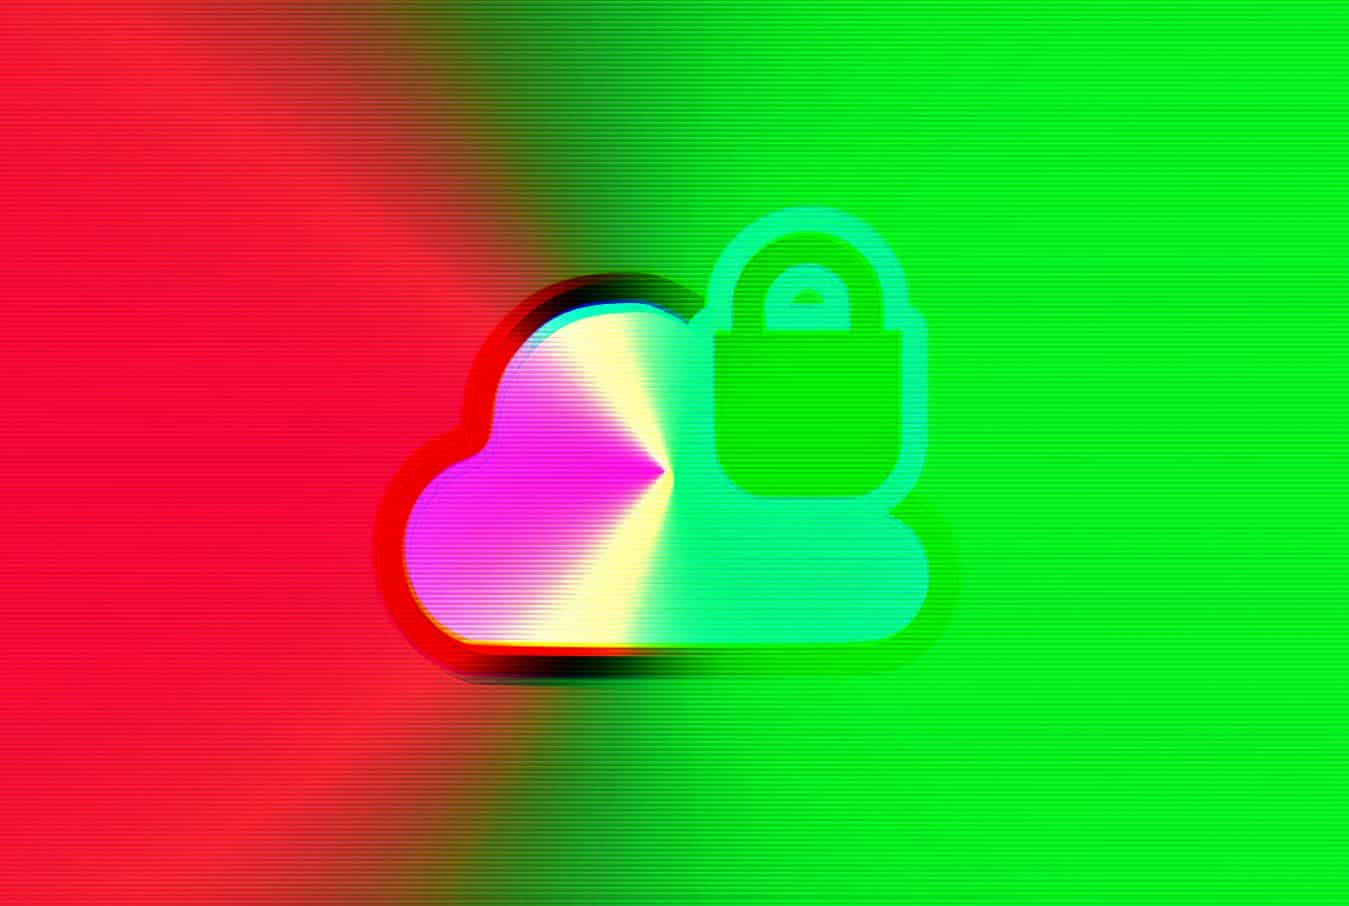 Cloud security is an ongoing struggle to keep sensitive data safe. Is it getting any easier?